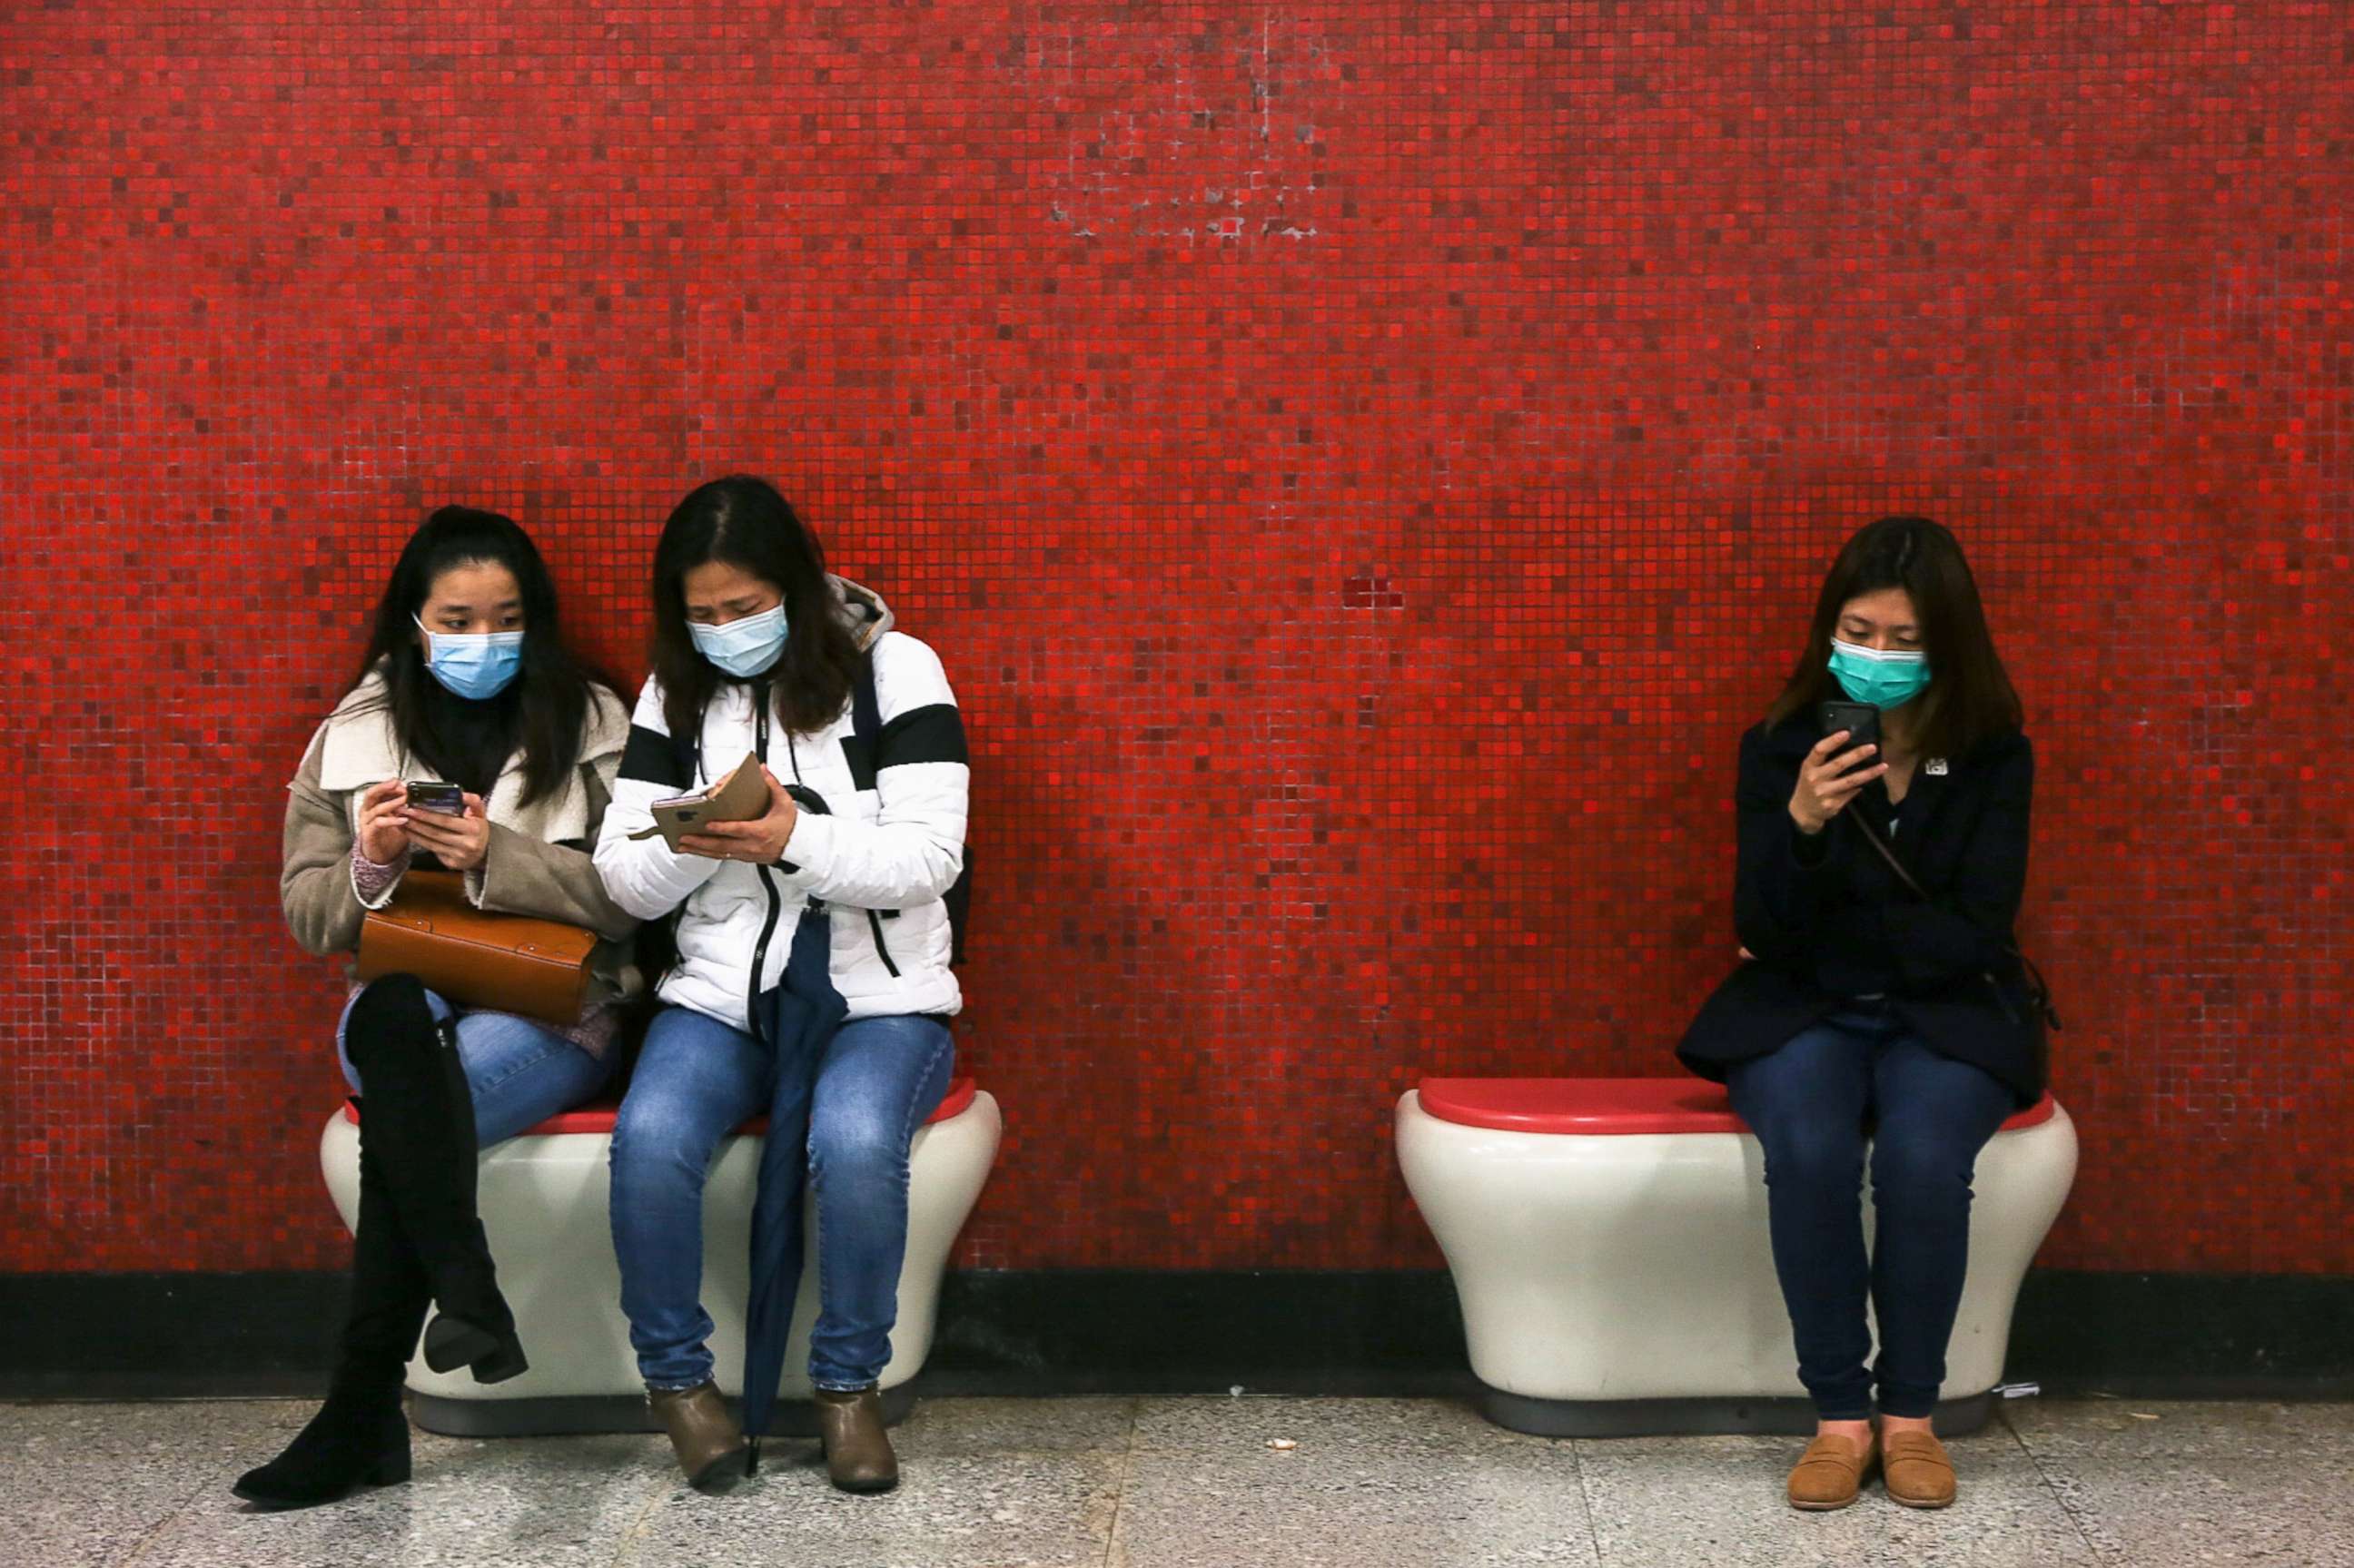 PHOTO: Passengers wearing face masks look at their mobile phones while waiting for the subway in Hong Kong, Jan. 26, 2020, during the Coronovirus outbreak.